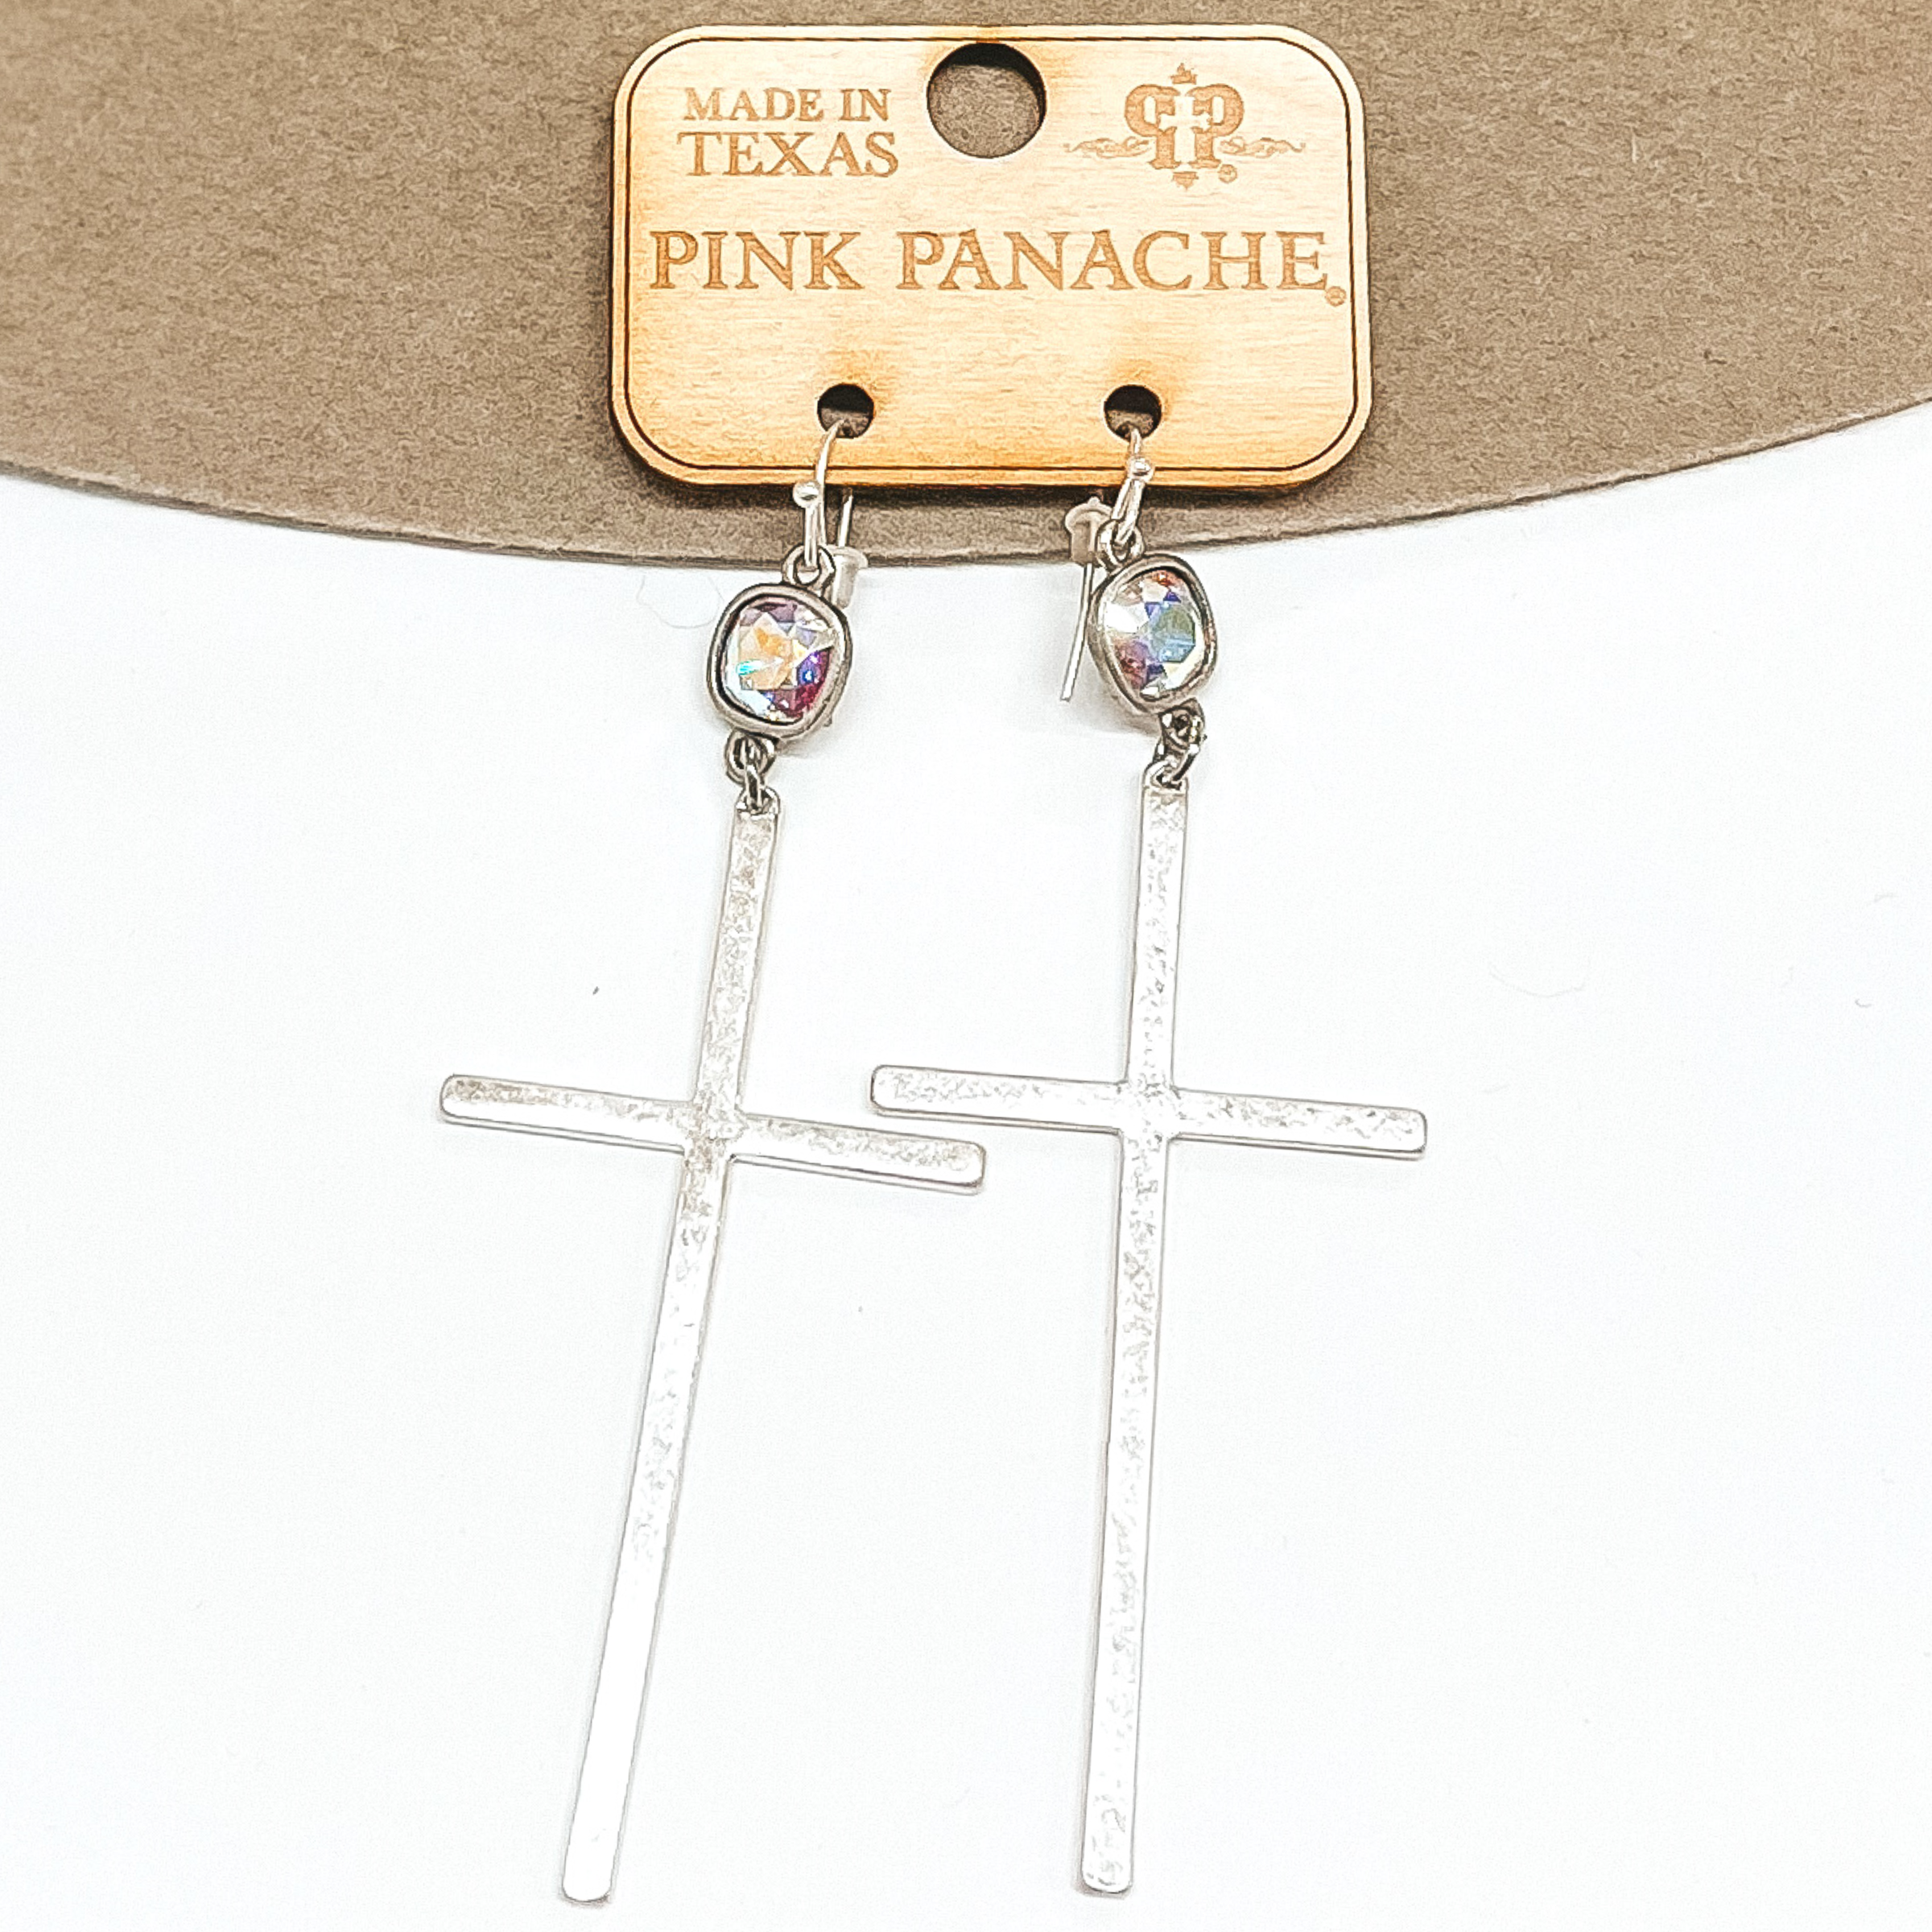 AB cushion cut crystals that are in a silver setting and are connected to silver fish hook earrings. Hanging from the crystals are smooth, silver cross pendants. These earrings are pictured on a tan and white background.